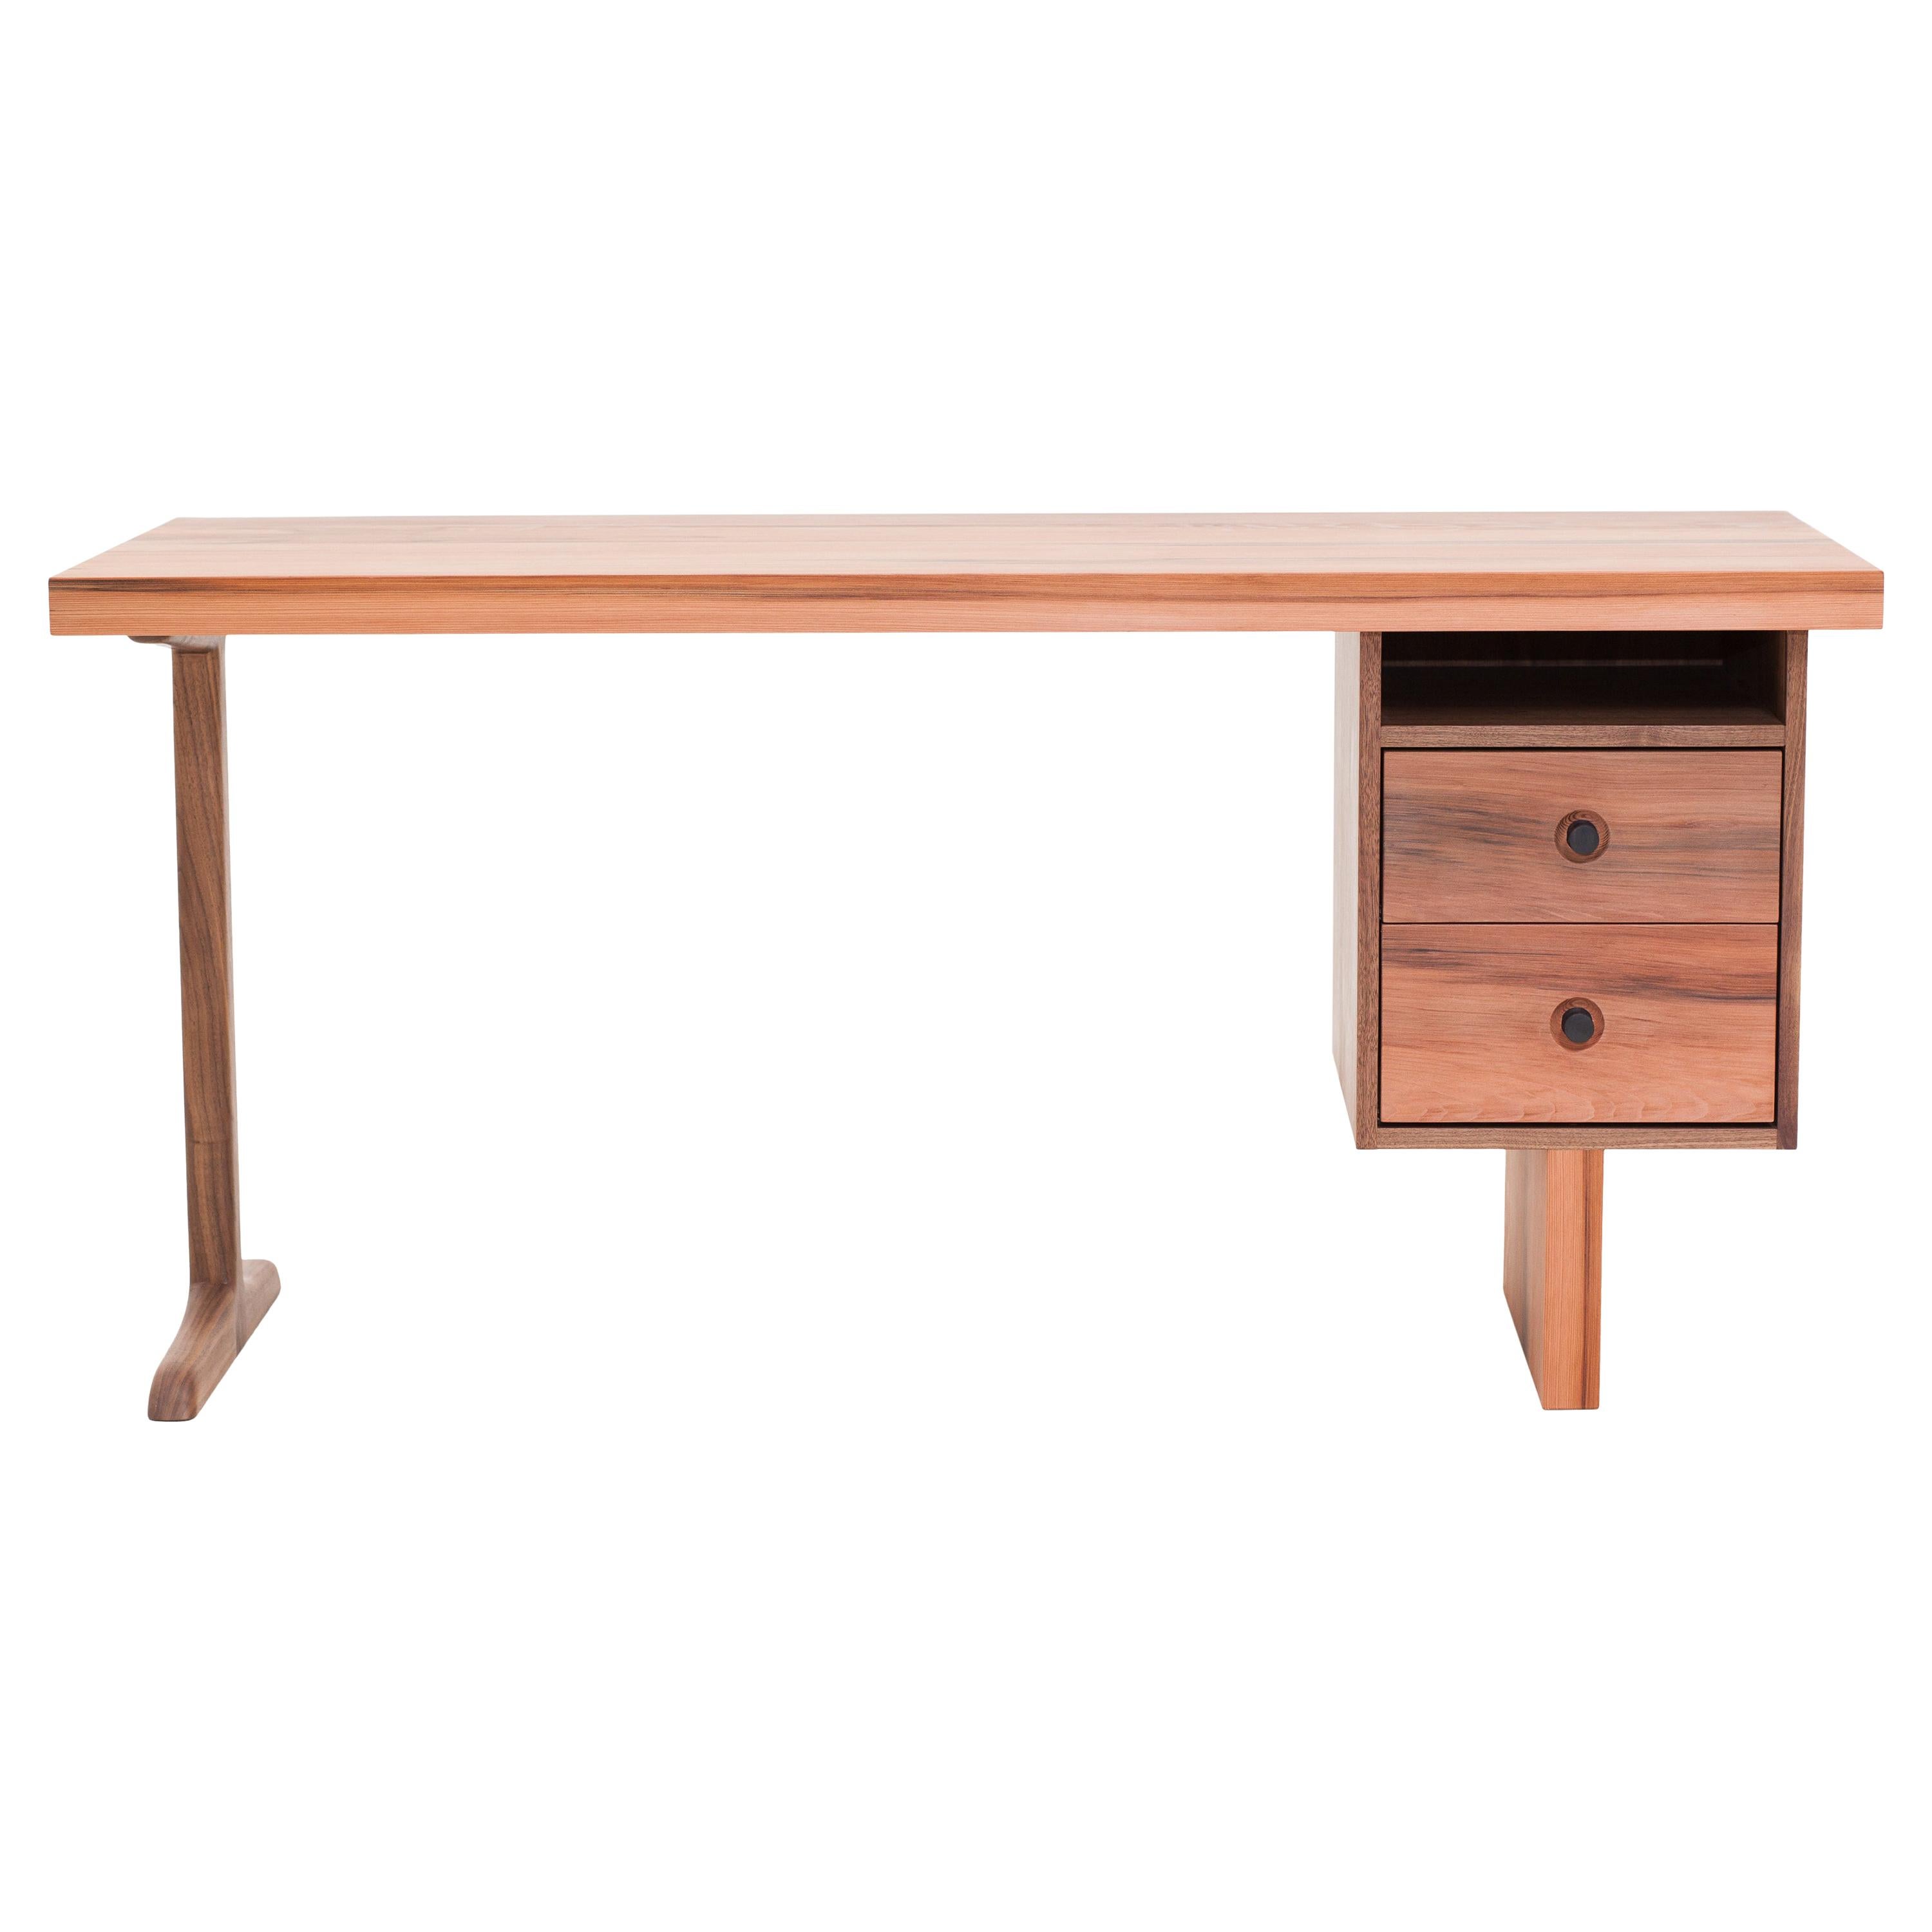 Desk from NYC Reclaimed Water Tower Wood, Drawers with Hand Turned Ebony Pulls For Sale